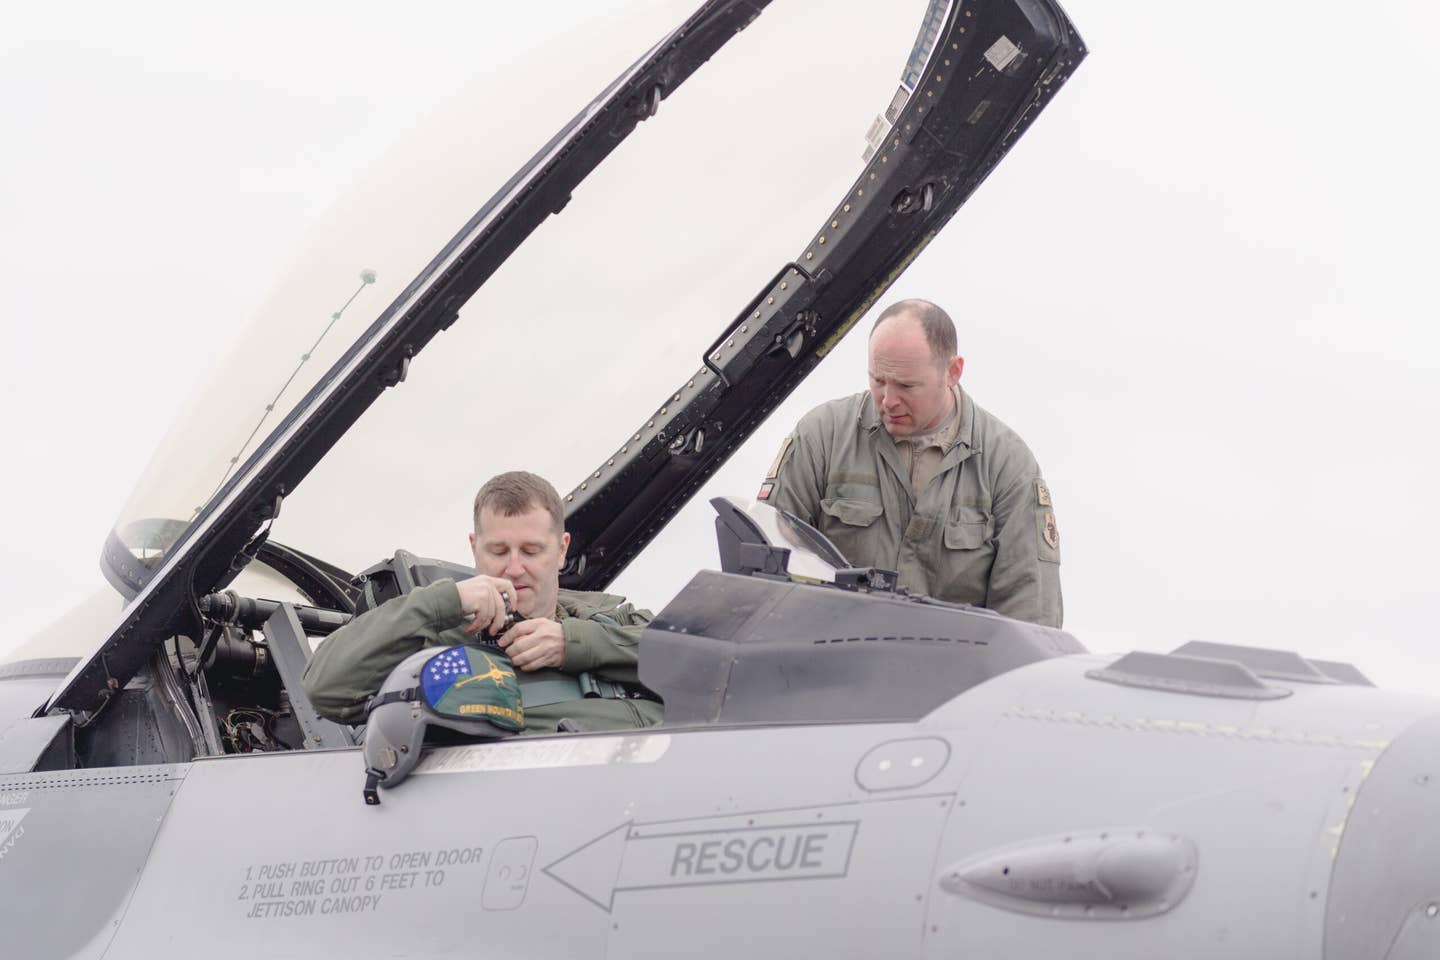 Lt. Col. Daniel Finnegan, a pilot, and Tech. Sgt. Frank Pastor, a crew chief, prepares Finnigan's F-16 Fighting Falcon for takeoff at the Vermont Air National Guard Base, South Burlington, Vt., April 6, 2019. (U.S. Air National Guard photo by Tech. Sgt. Ryan Campbell)